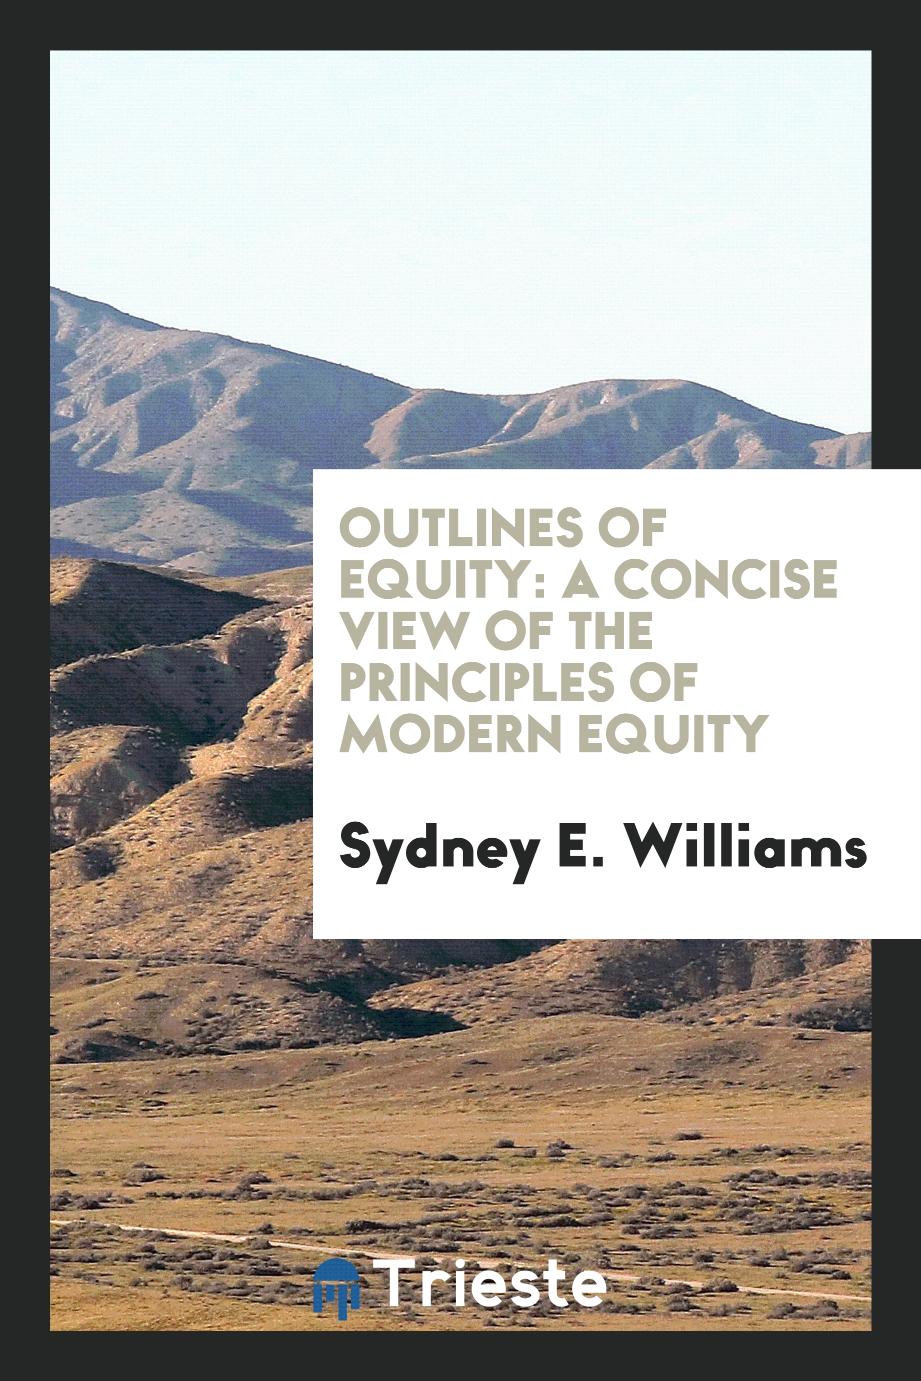 Outlines of Equity: A Concise View of the Principles of Modern Equity